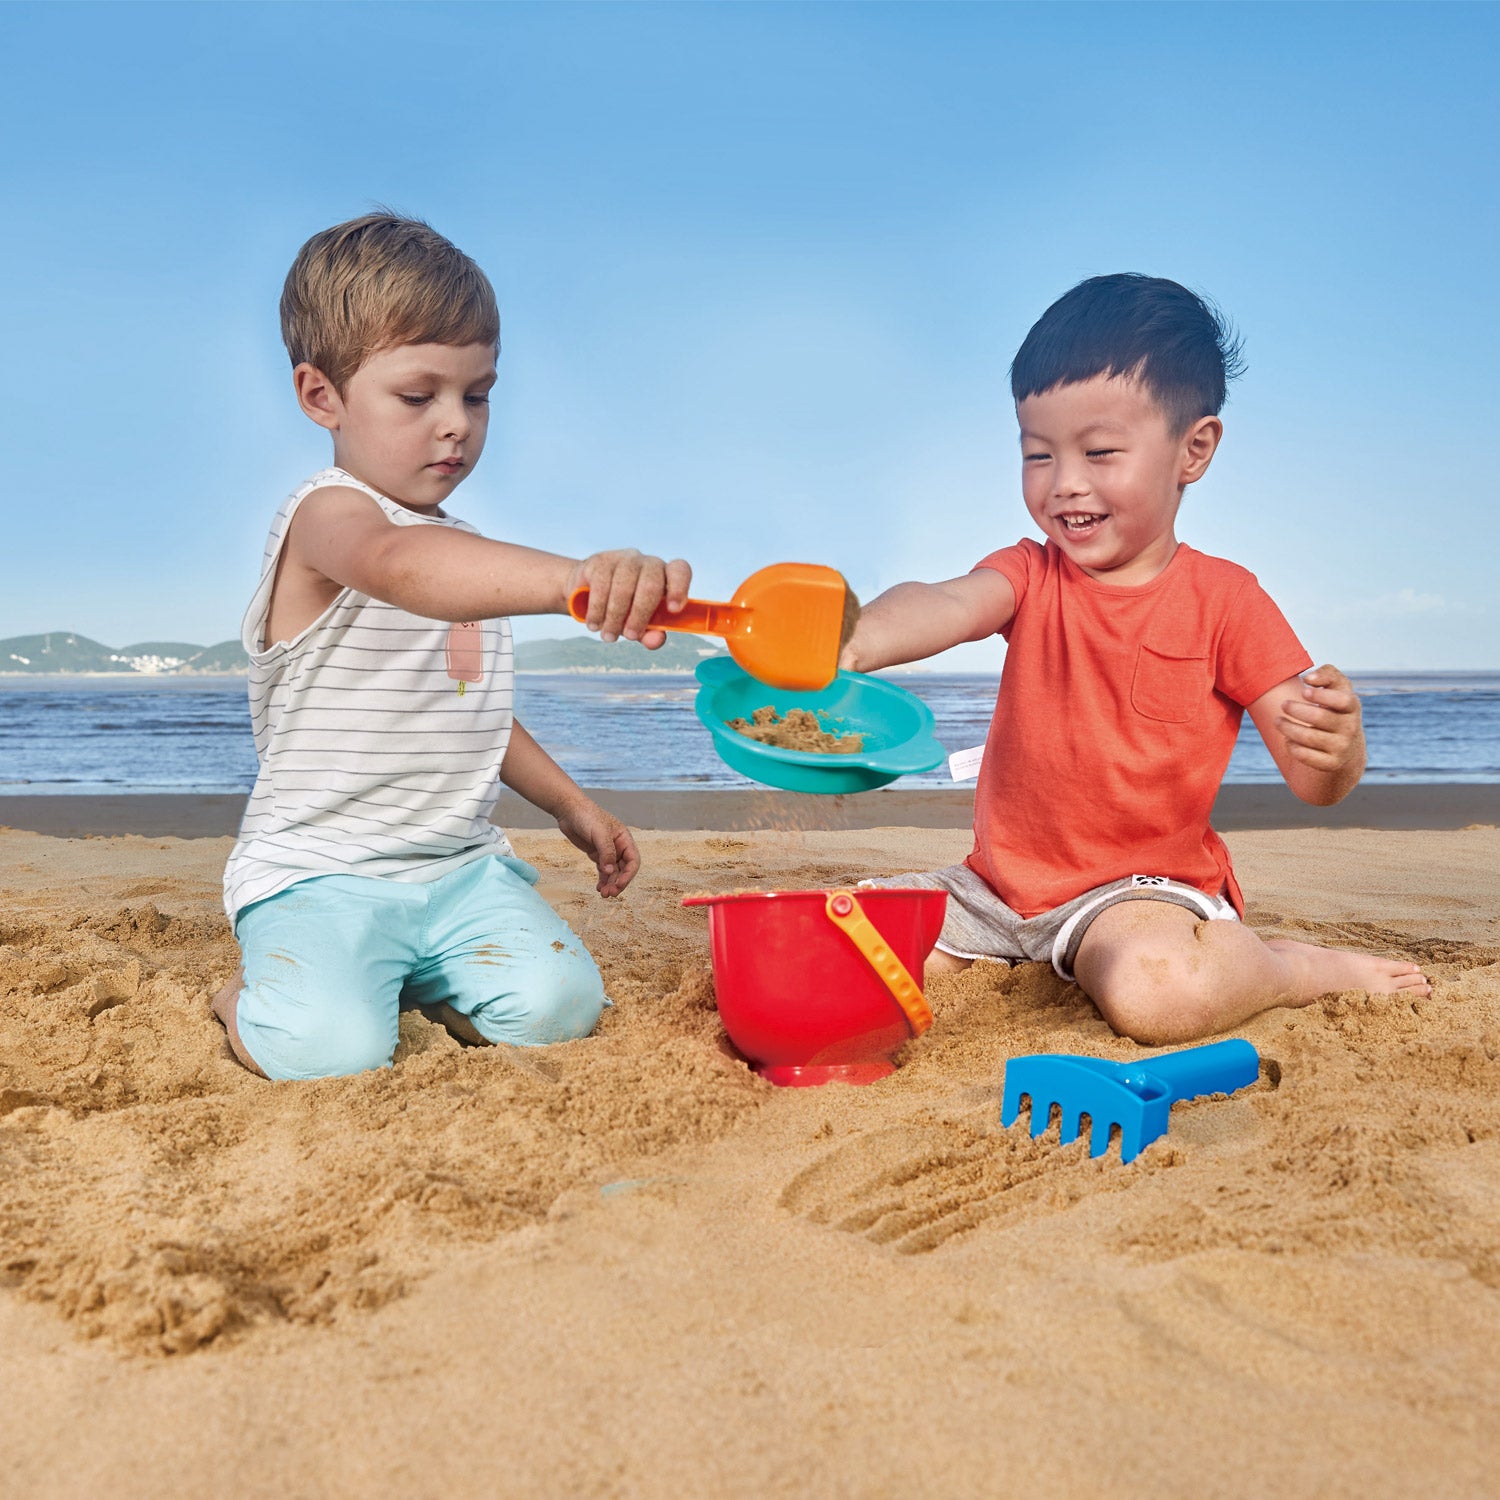 Hape Beach Basics perfect for the sand or backyard play with quality outdoor toys The Toy Wagon